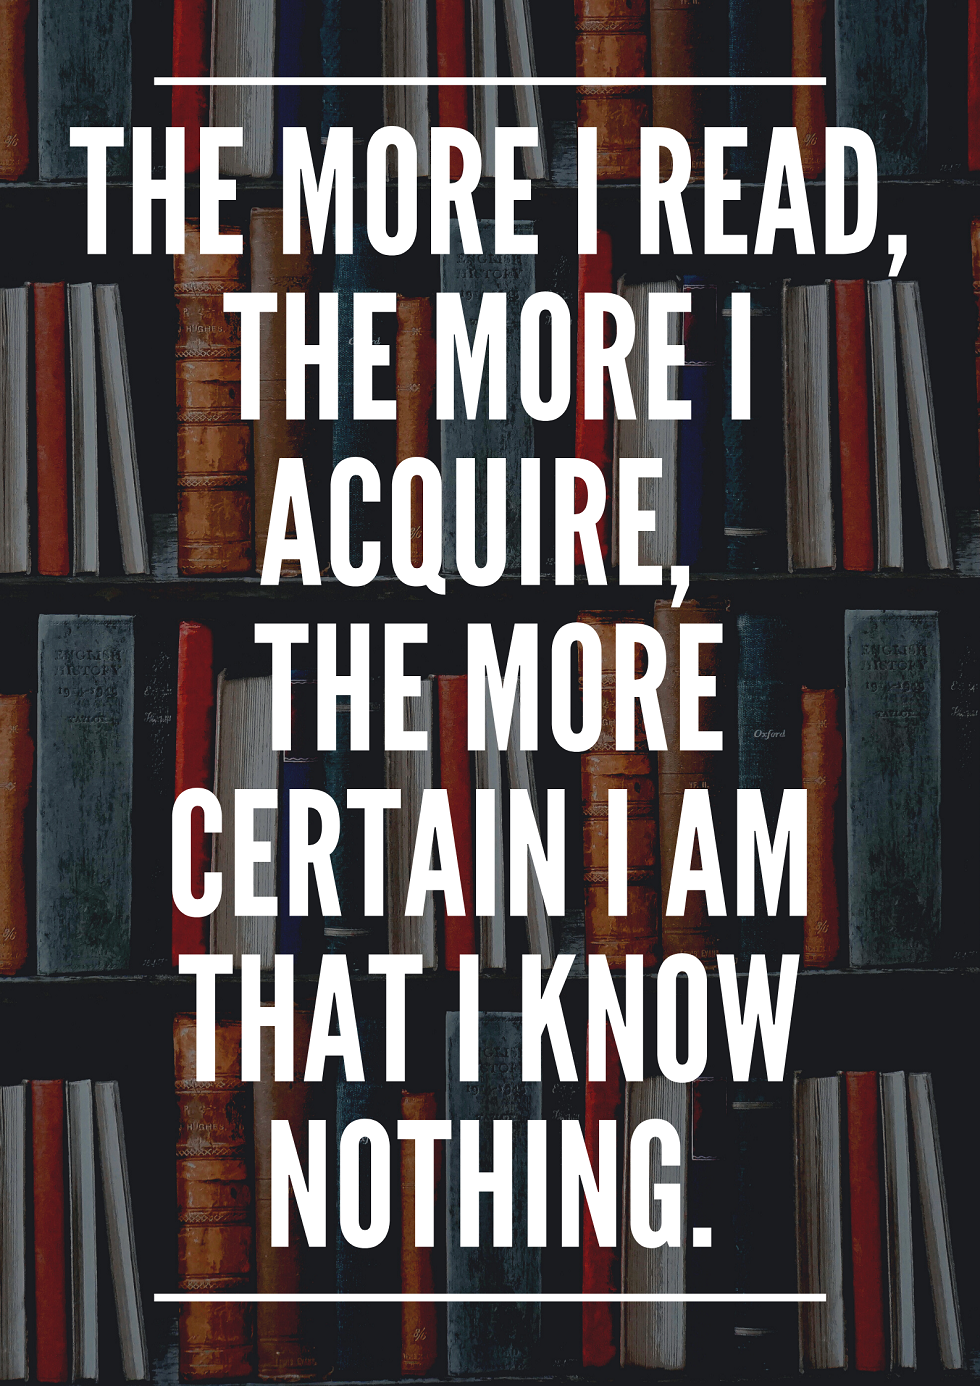 The more I read, the more I acquire, the more certain I am that I know nothing